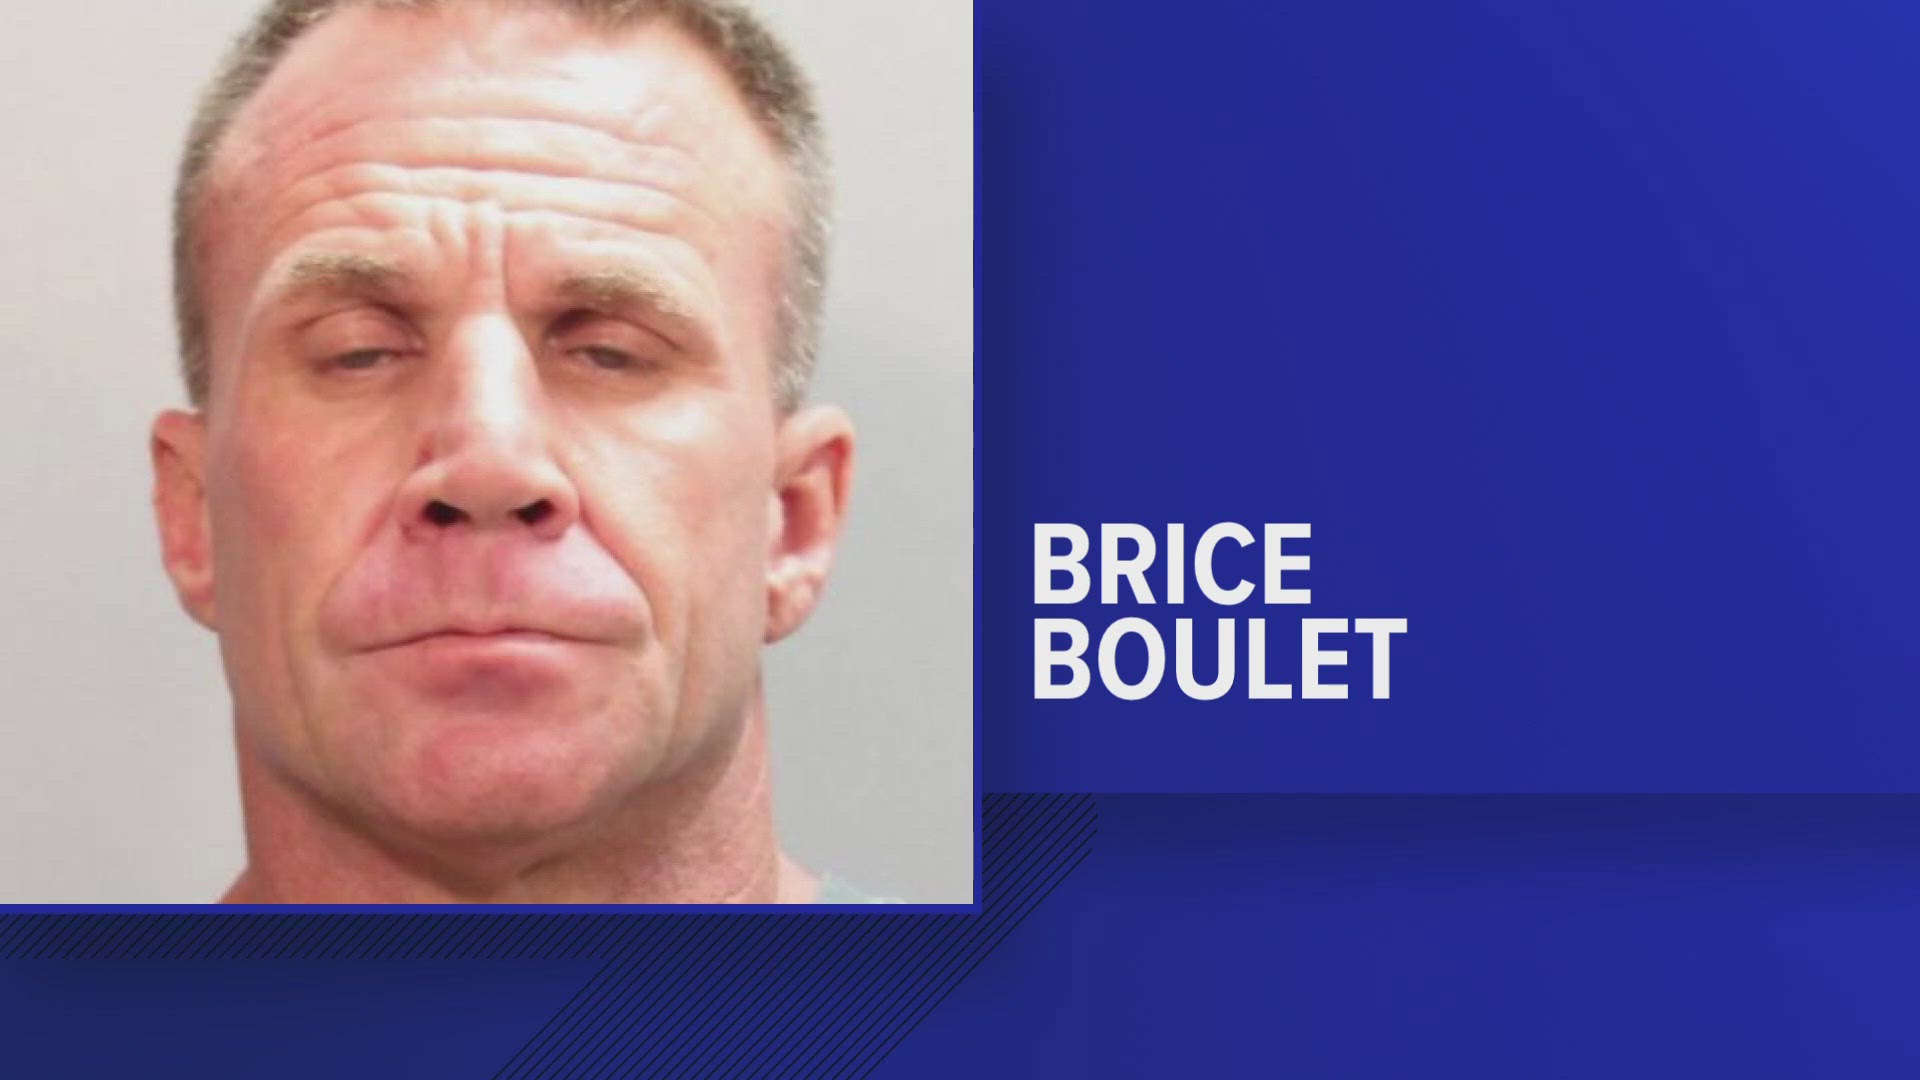 Brice Boulet, 47, faces multiple felony charges including vehicular homicide.